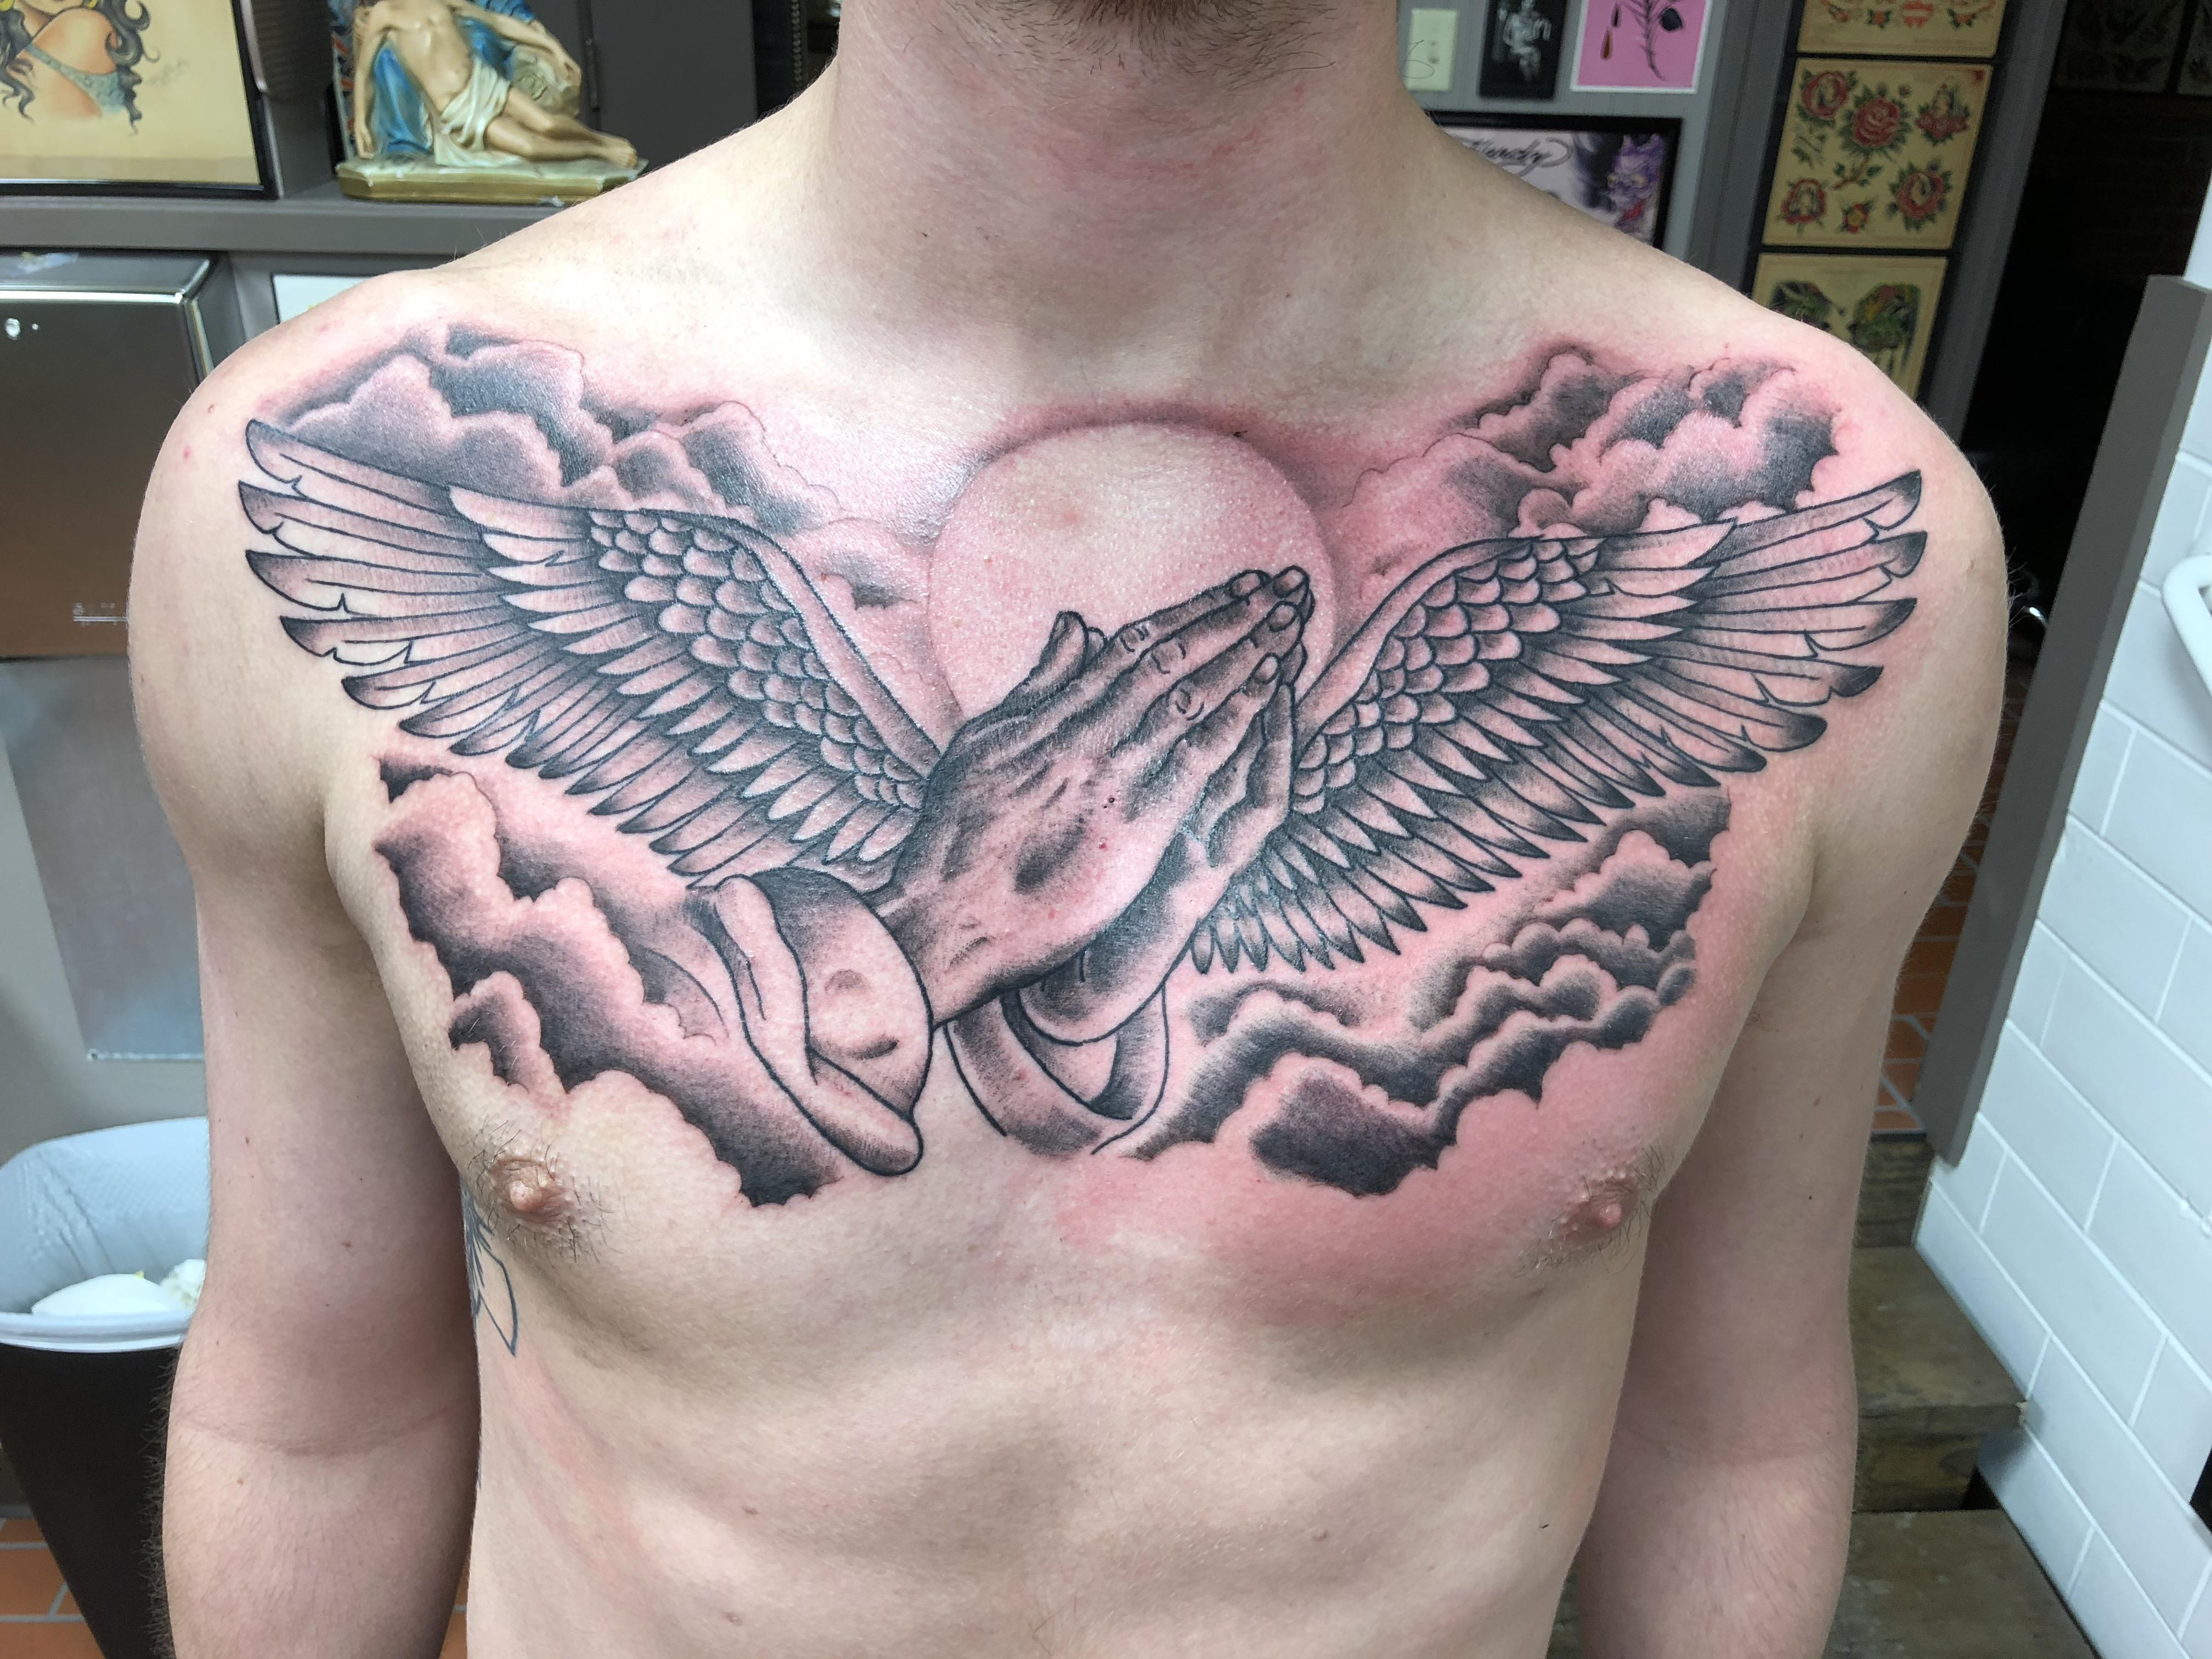 Chest Piece Jason Parker At Freedom Ink Tattoo Peoria Il Tattoos pertaining to dimensions 4032 X 3024